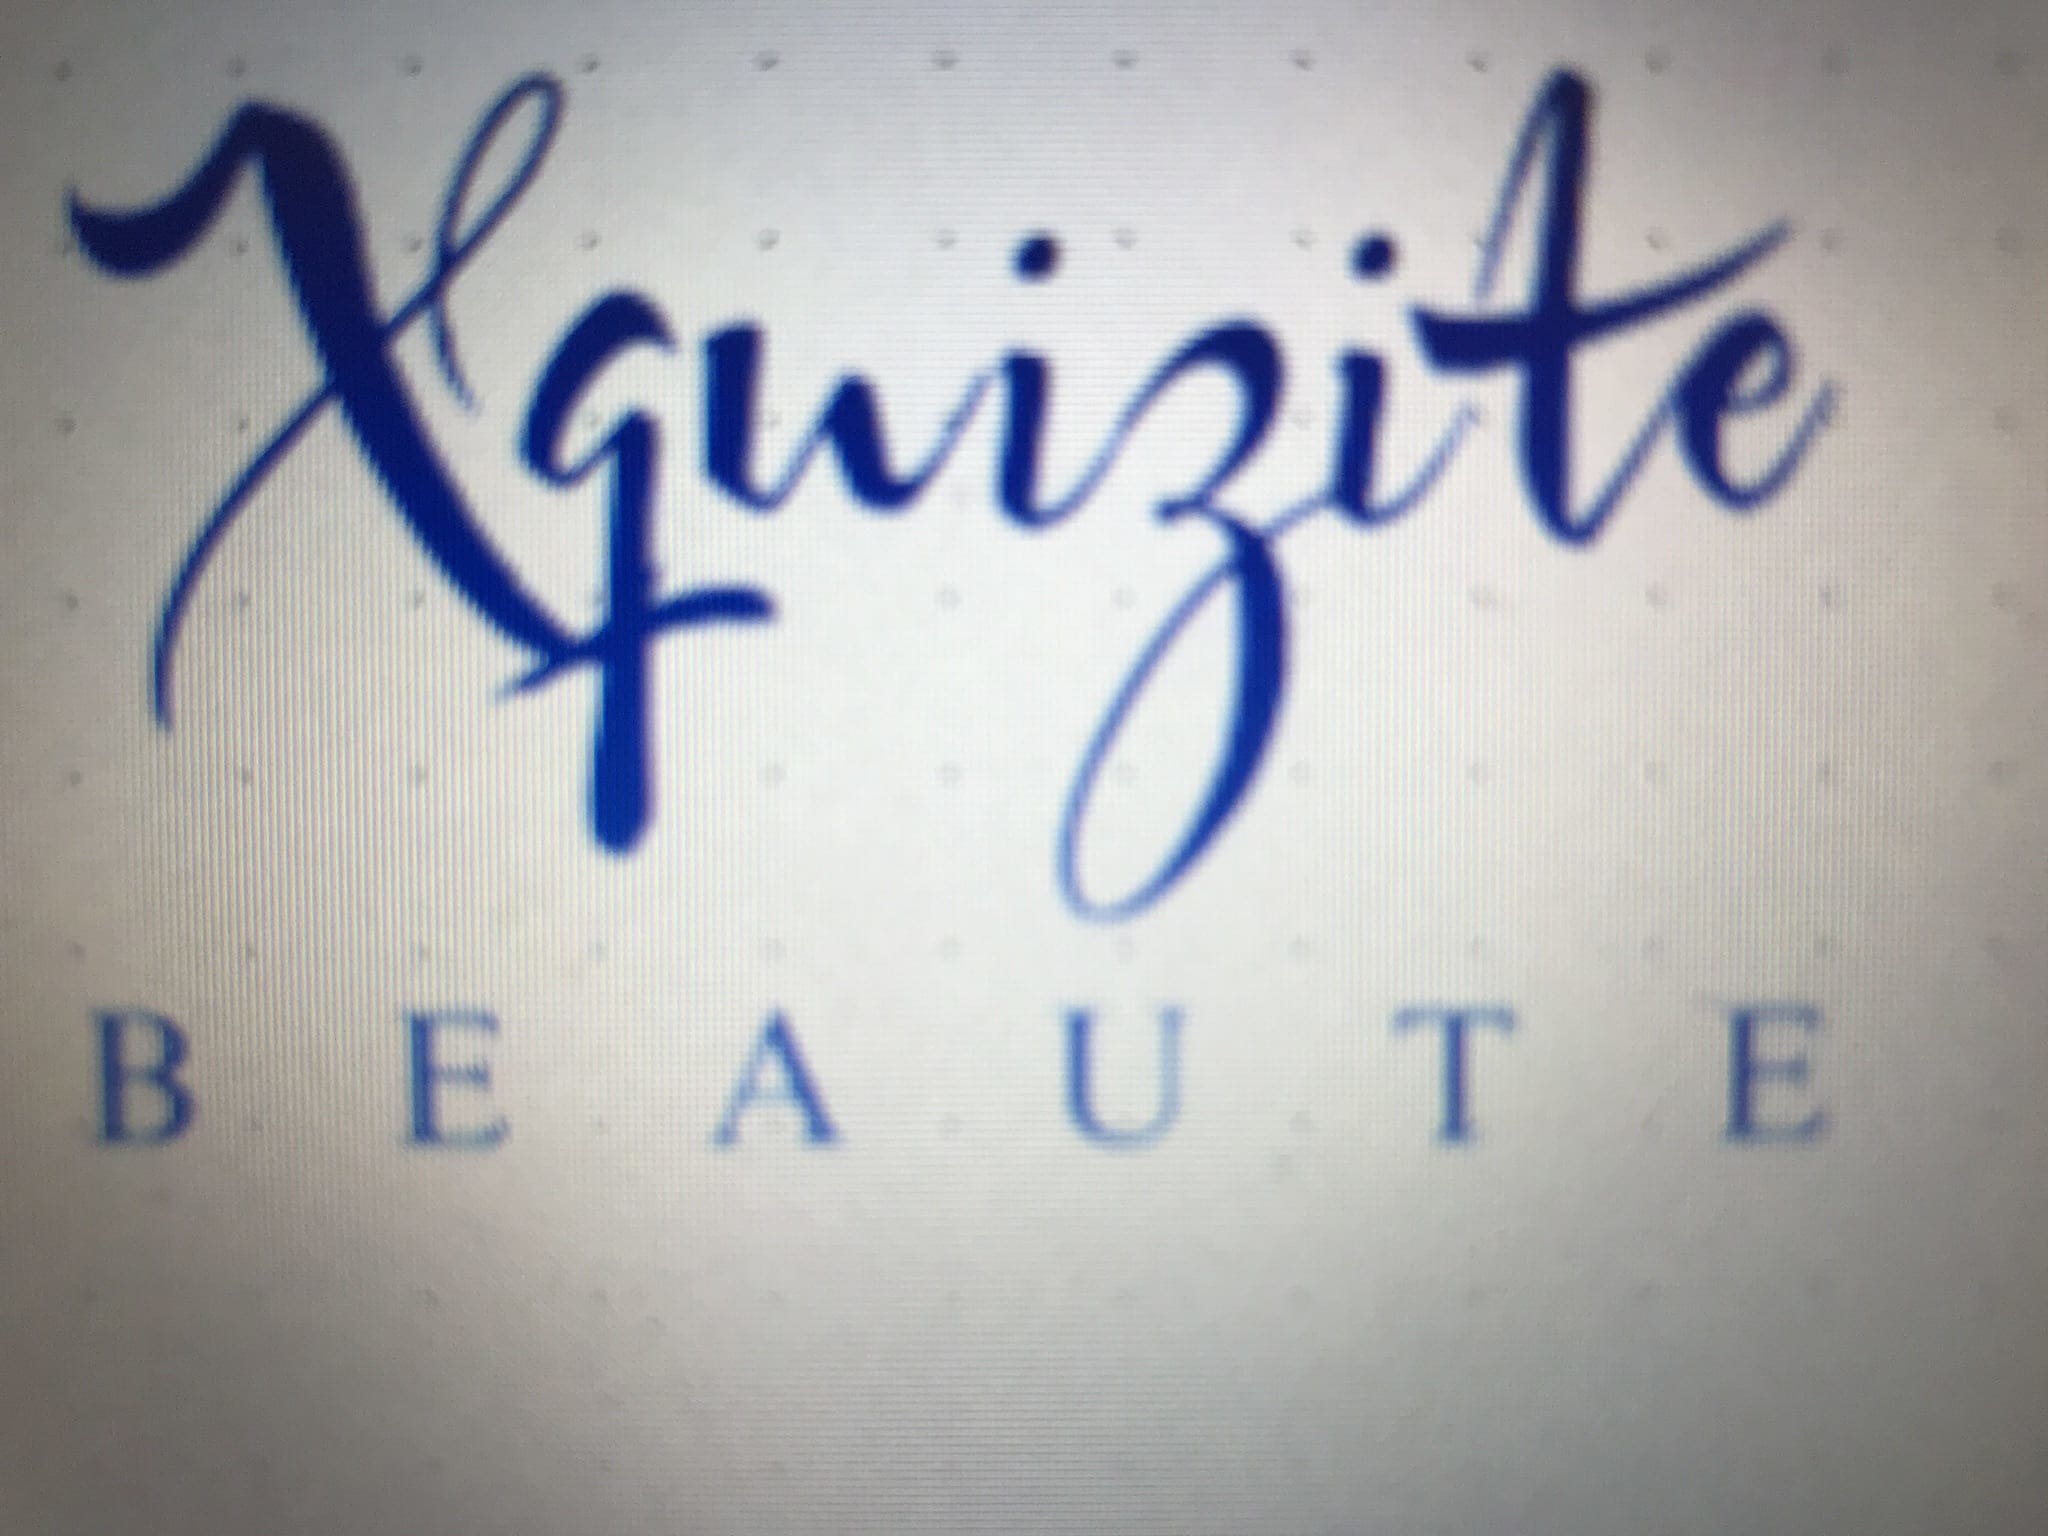 Xquizite Beaute’ by Ray